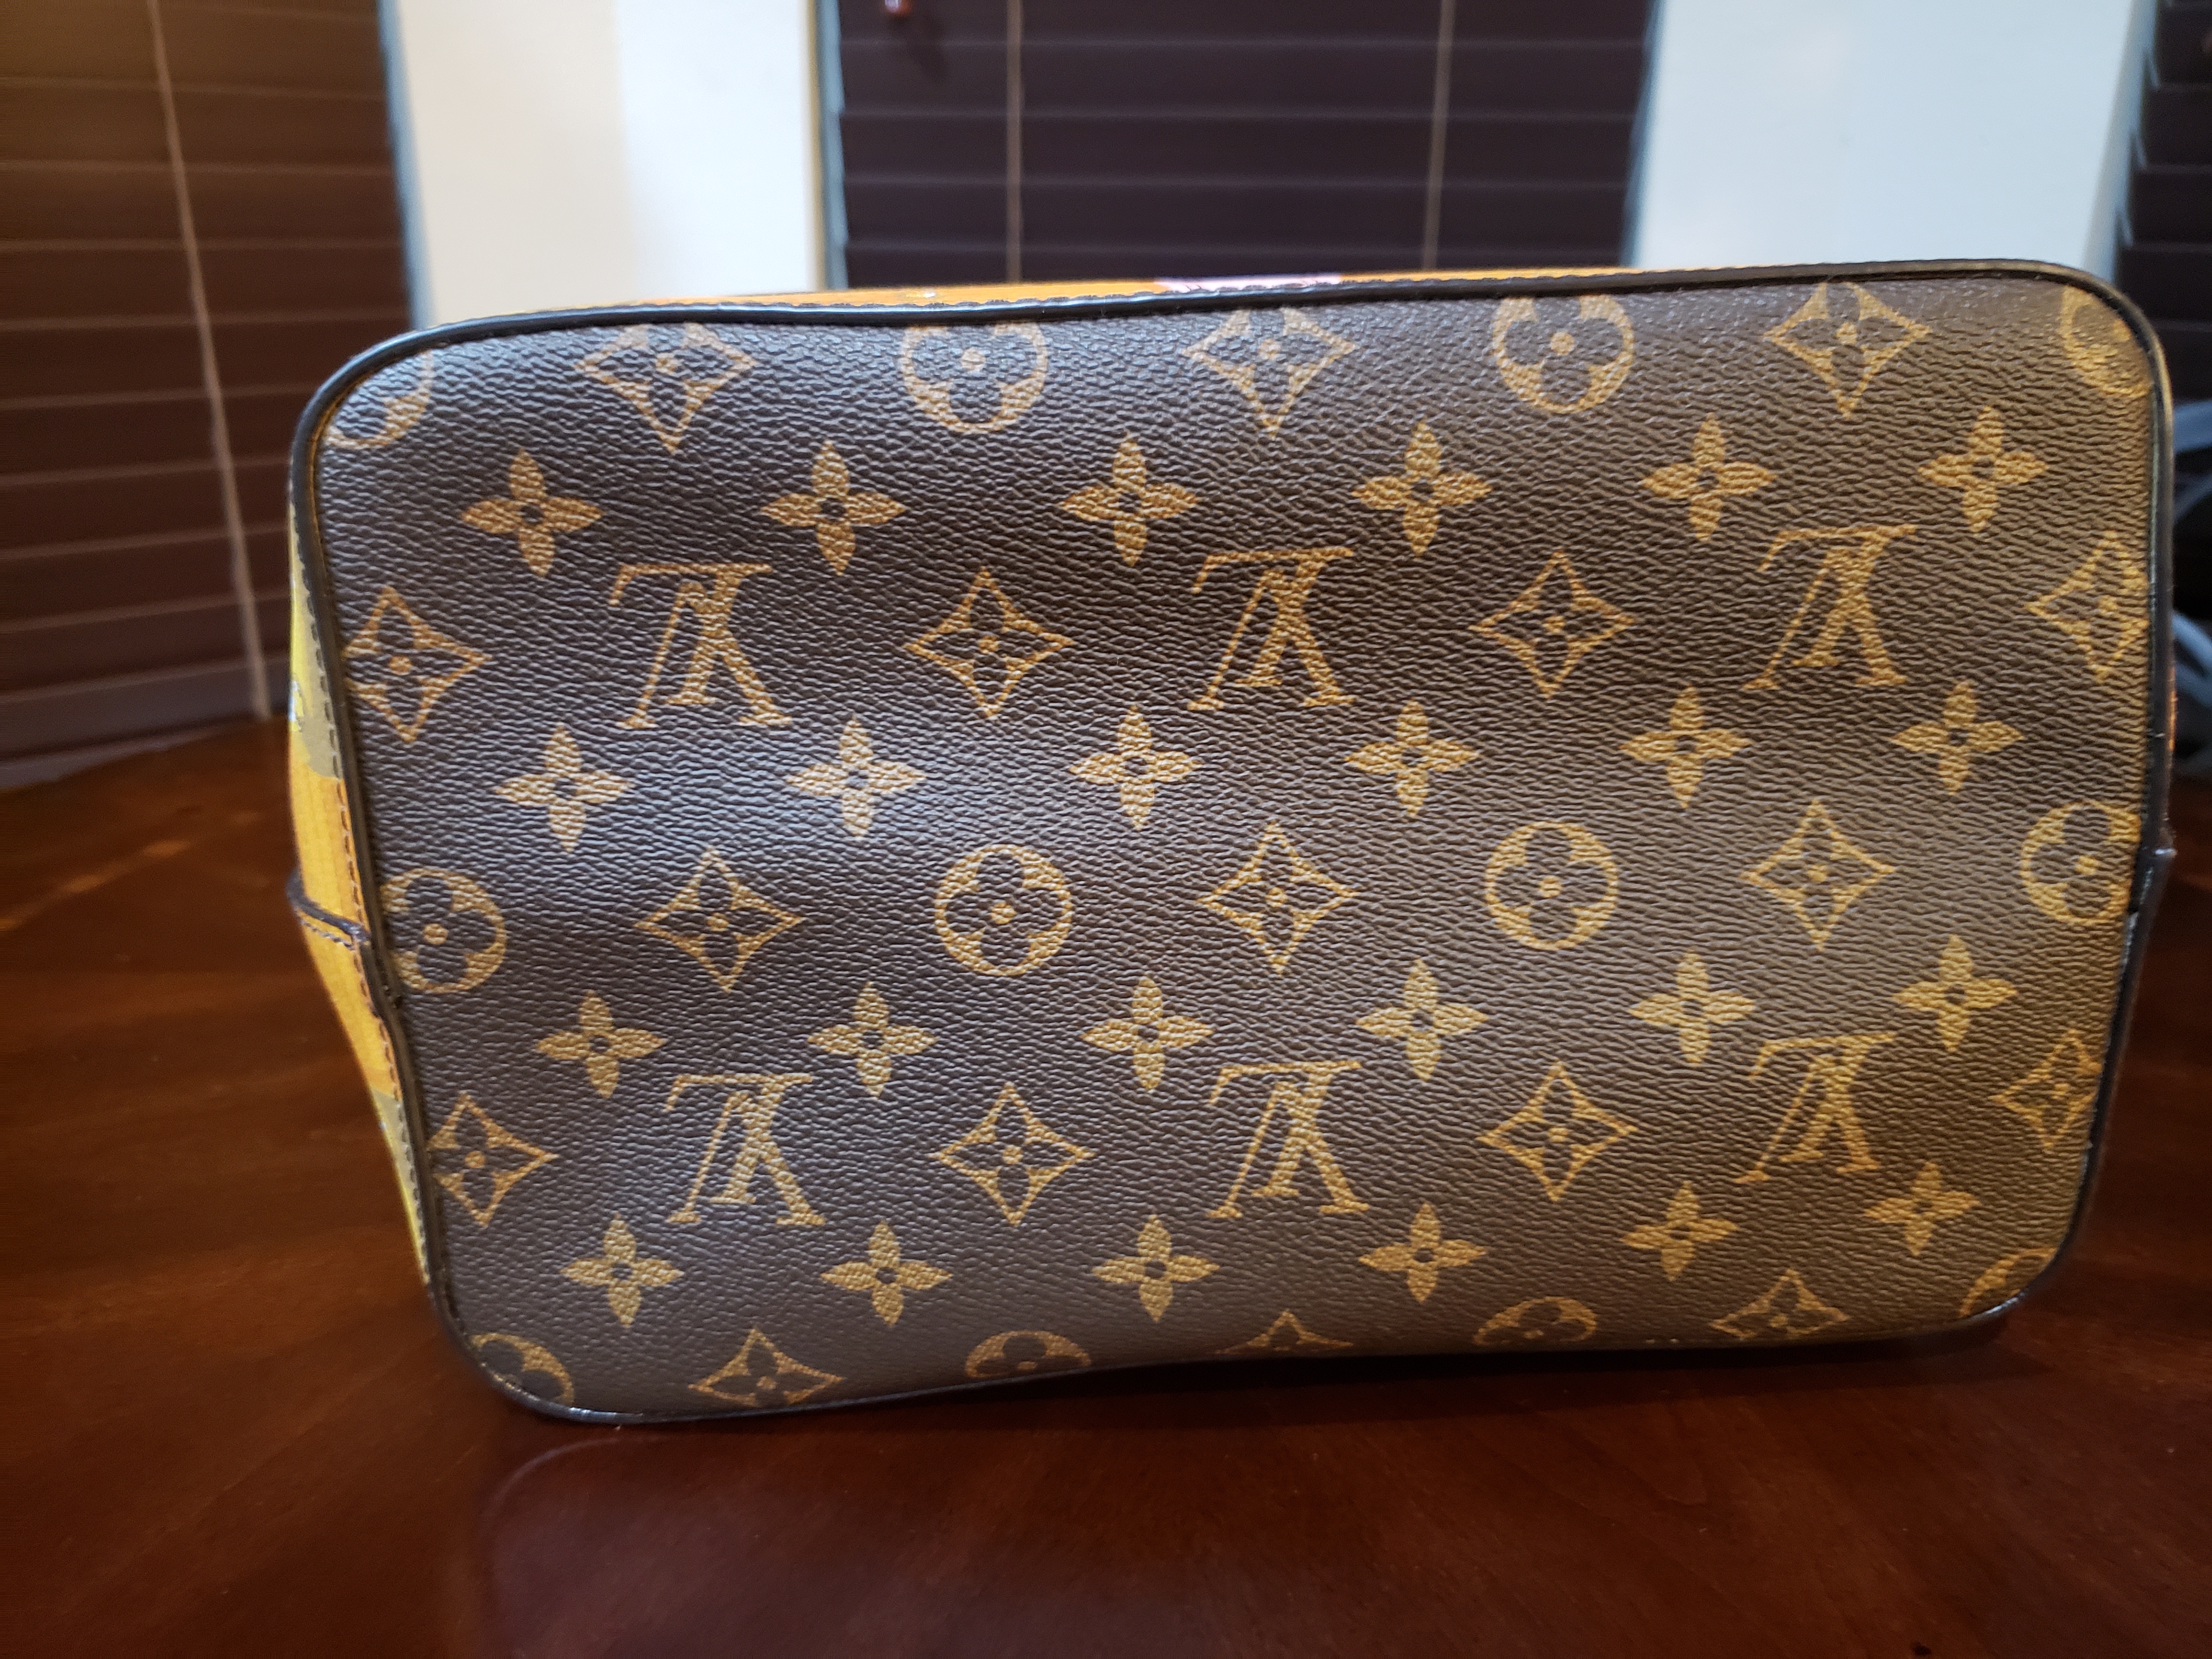 Which Seller Should I Go for Louis Vuitton Replica? (Full Review on Horizon  55) - DreamPurses